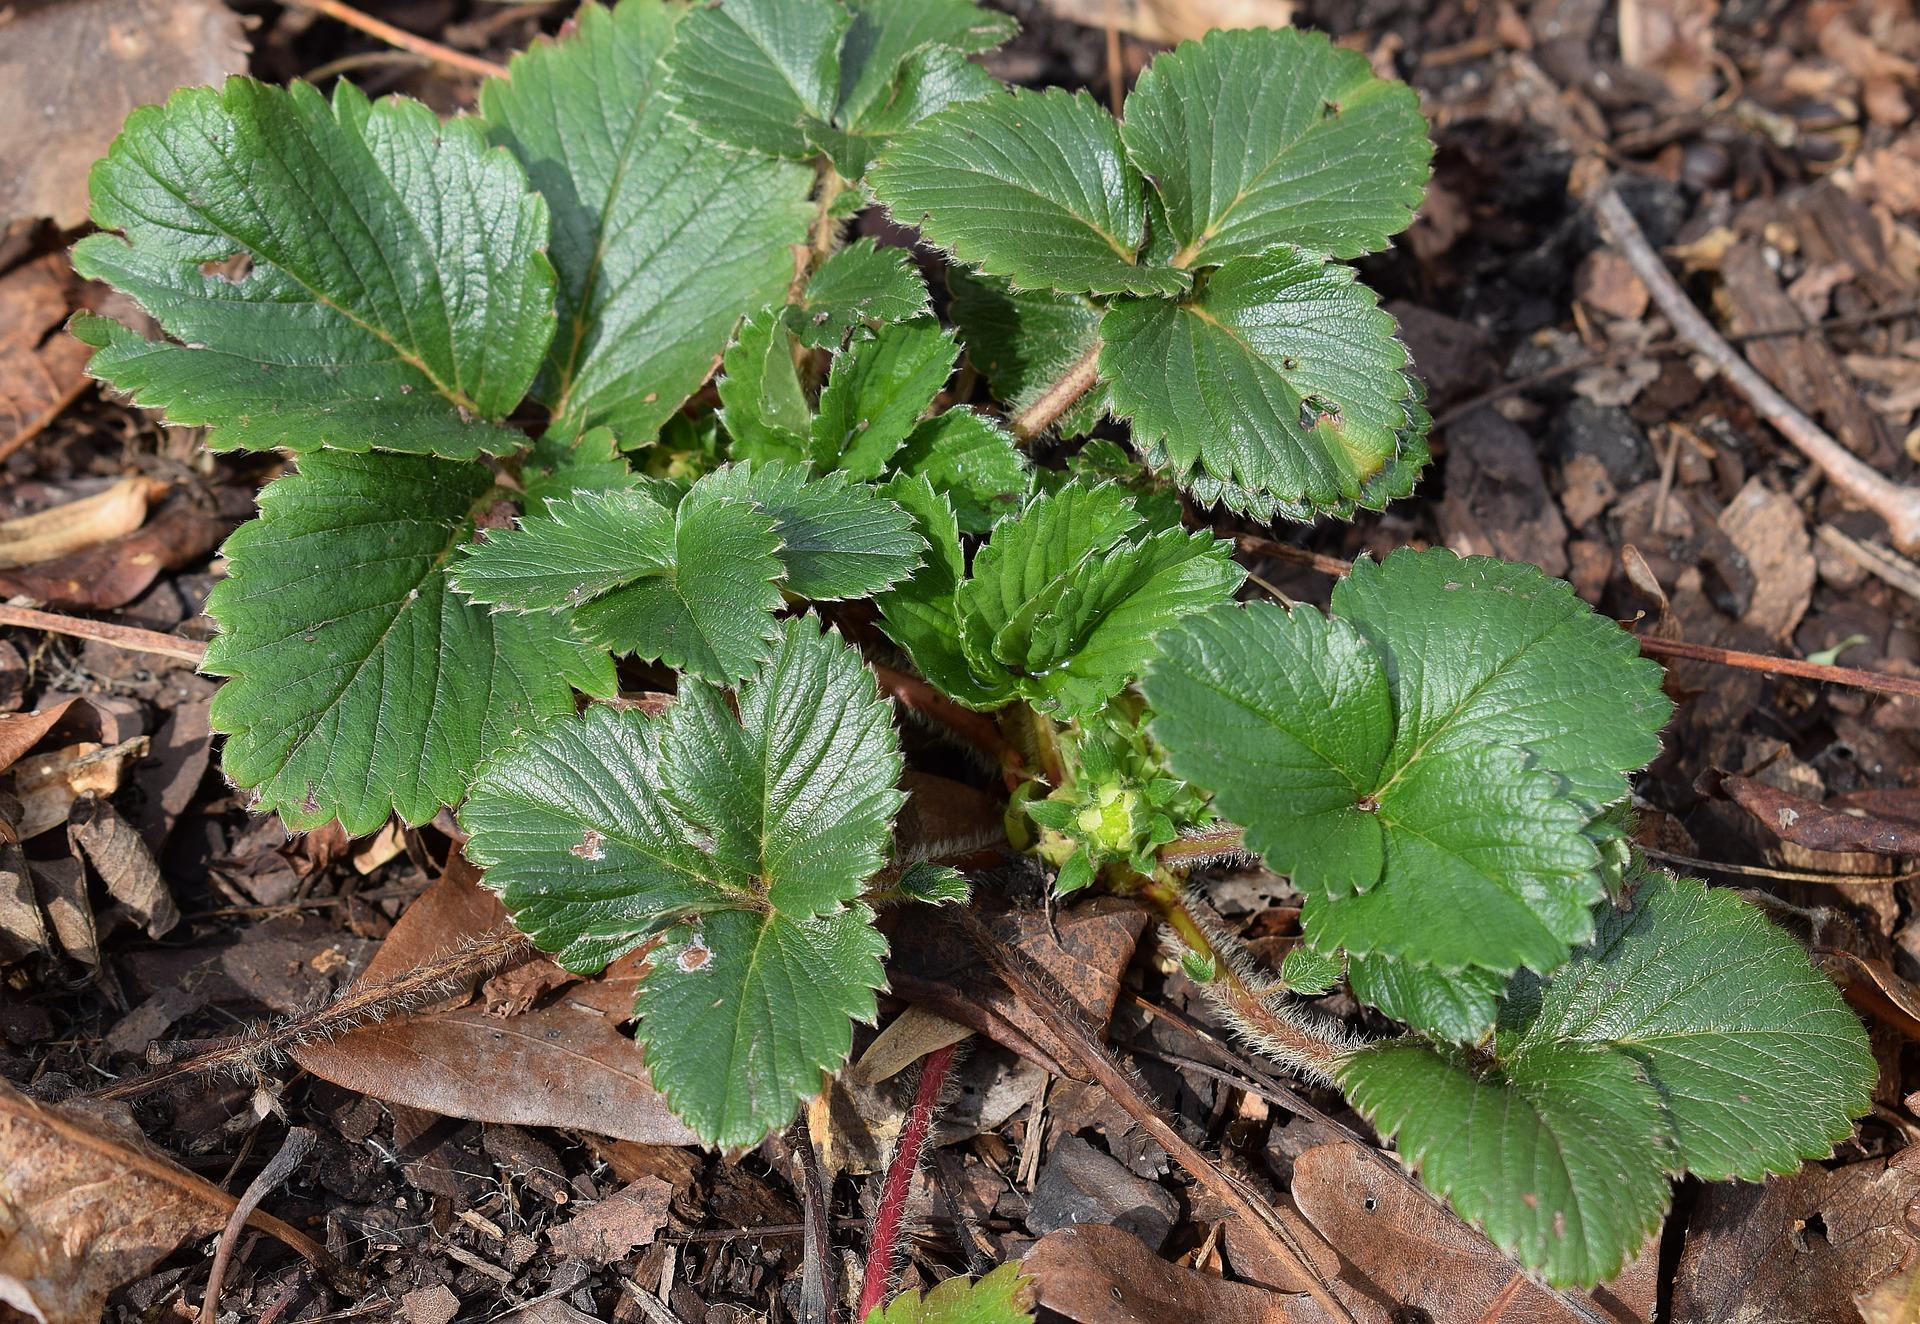 uploads/images/Strawberry Plant With Buds 2122546_1920